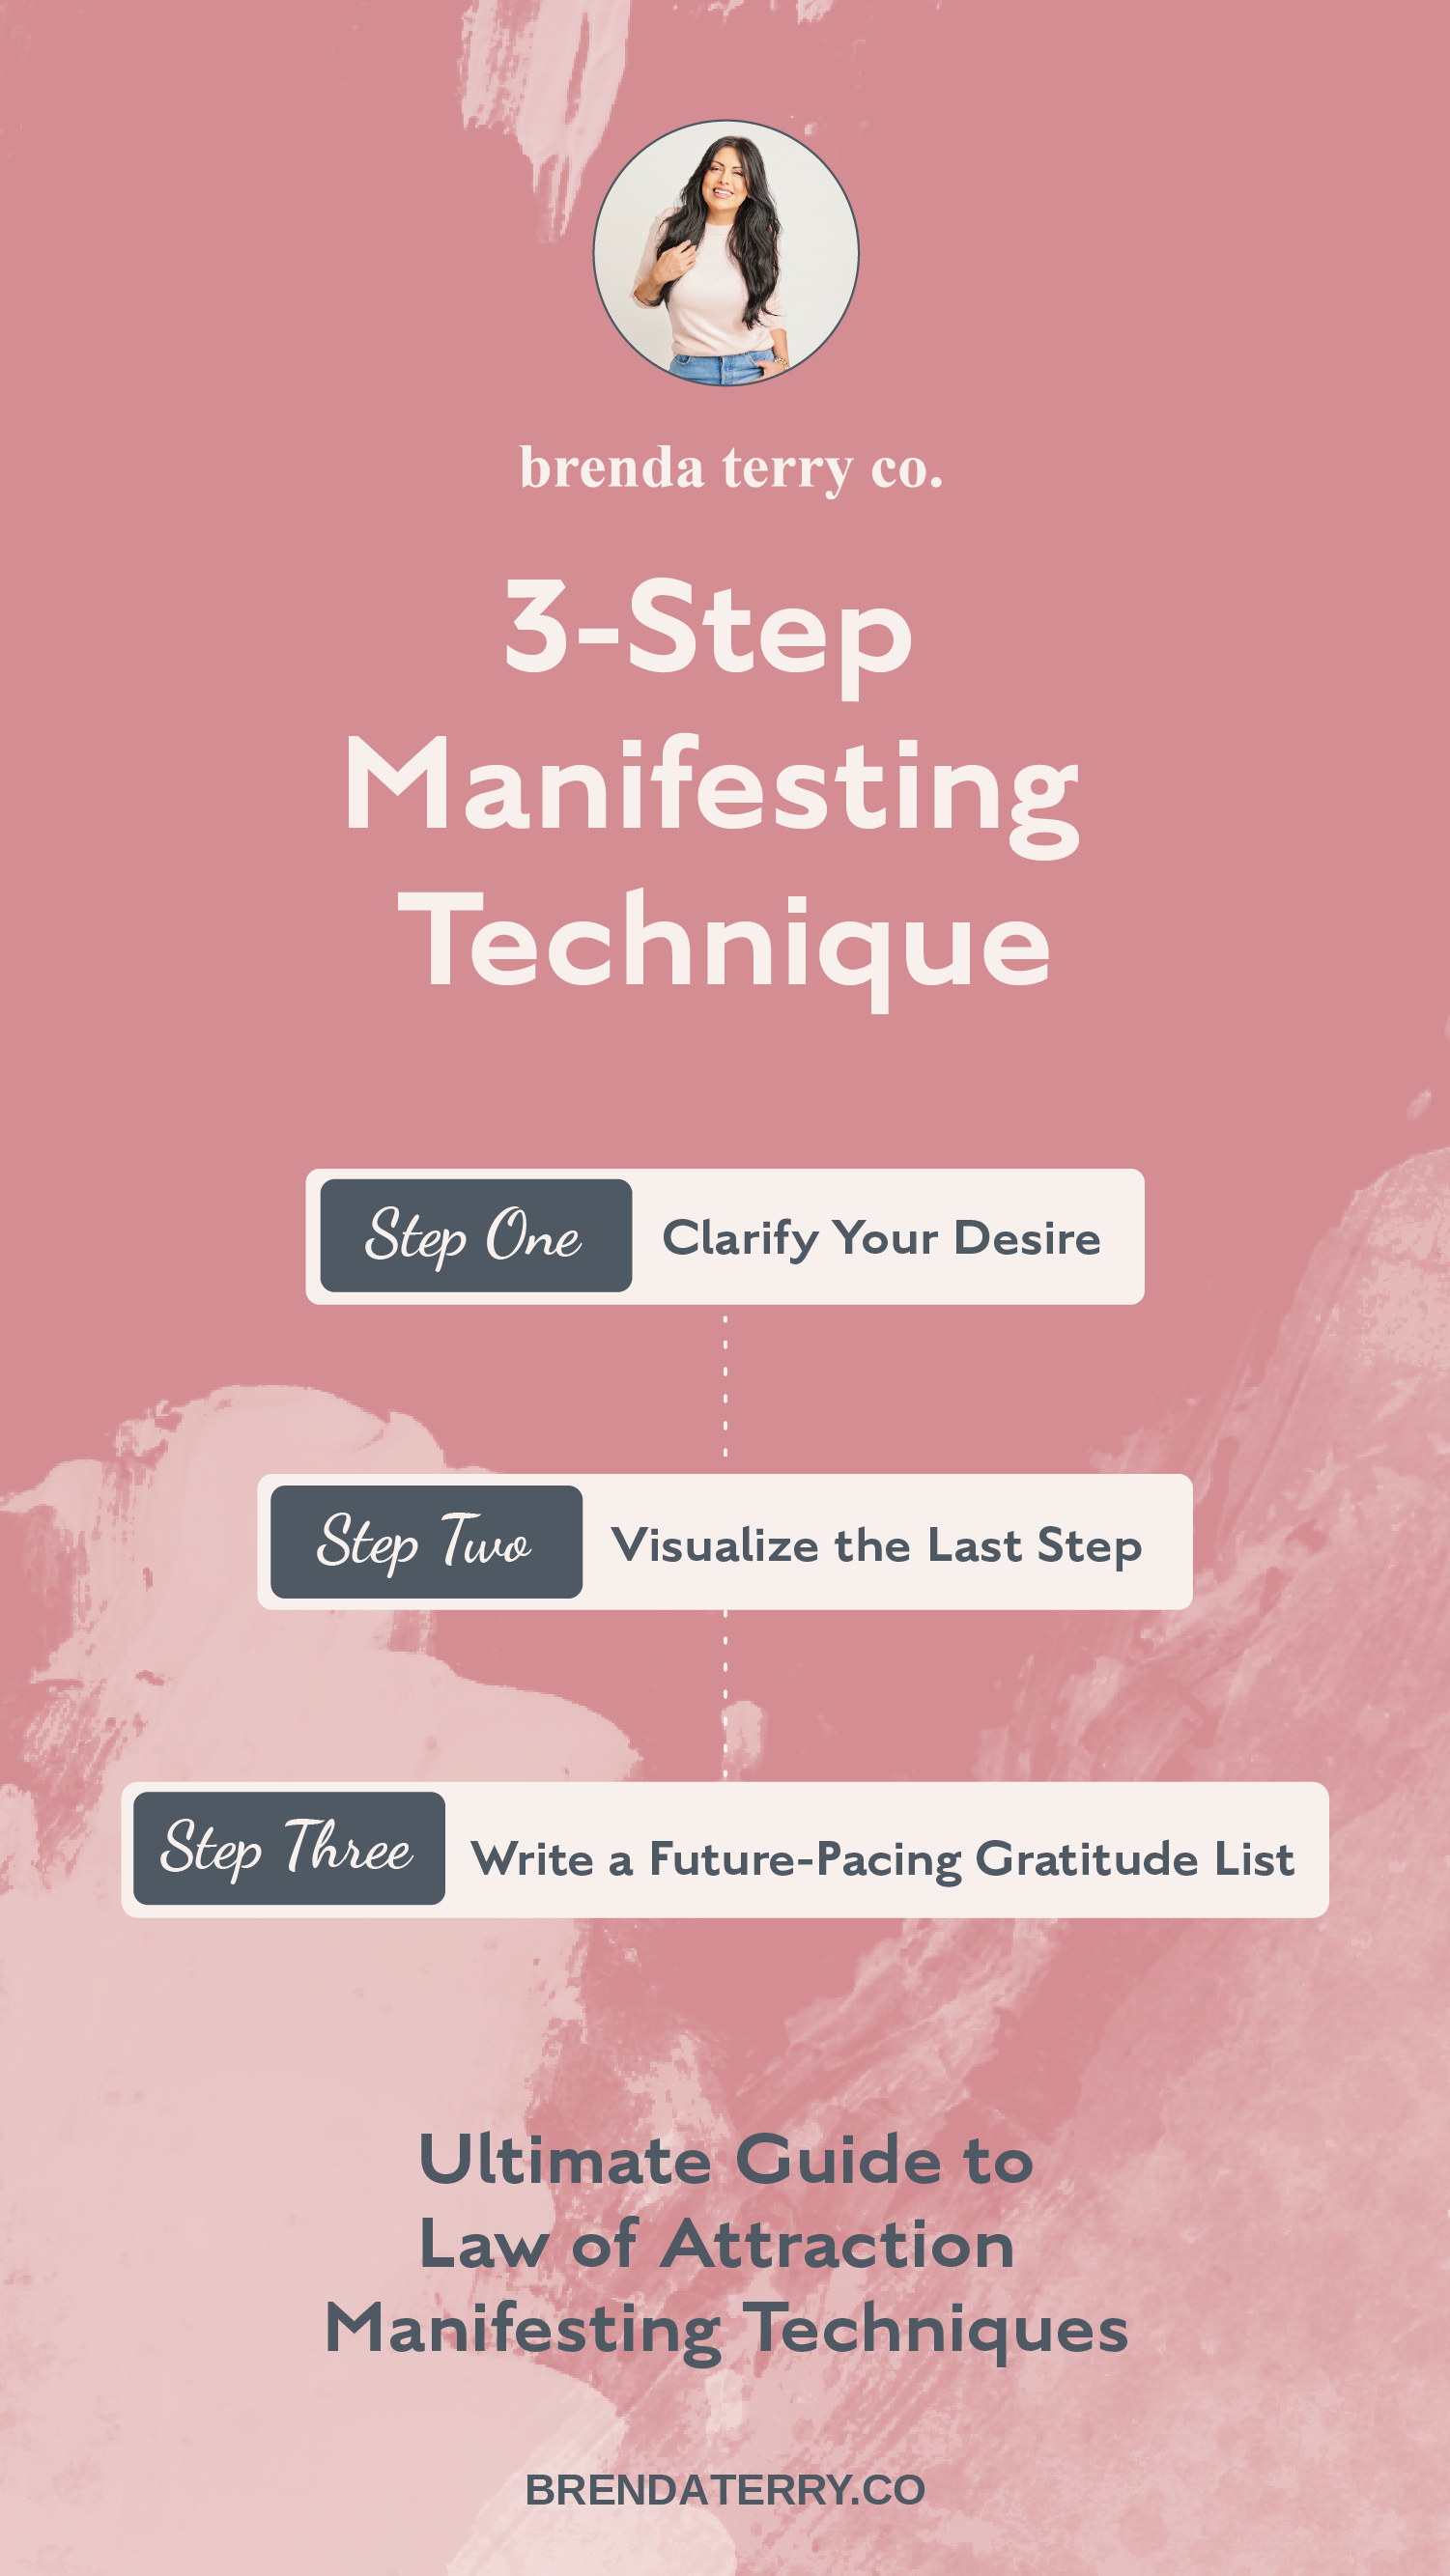 Visualization Sequence for Manifesting Success